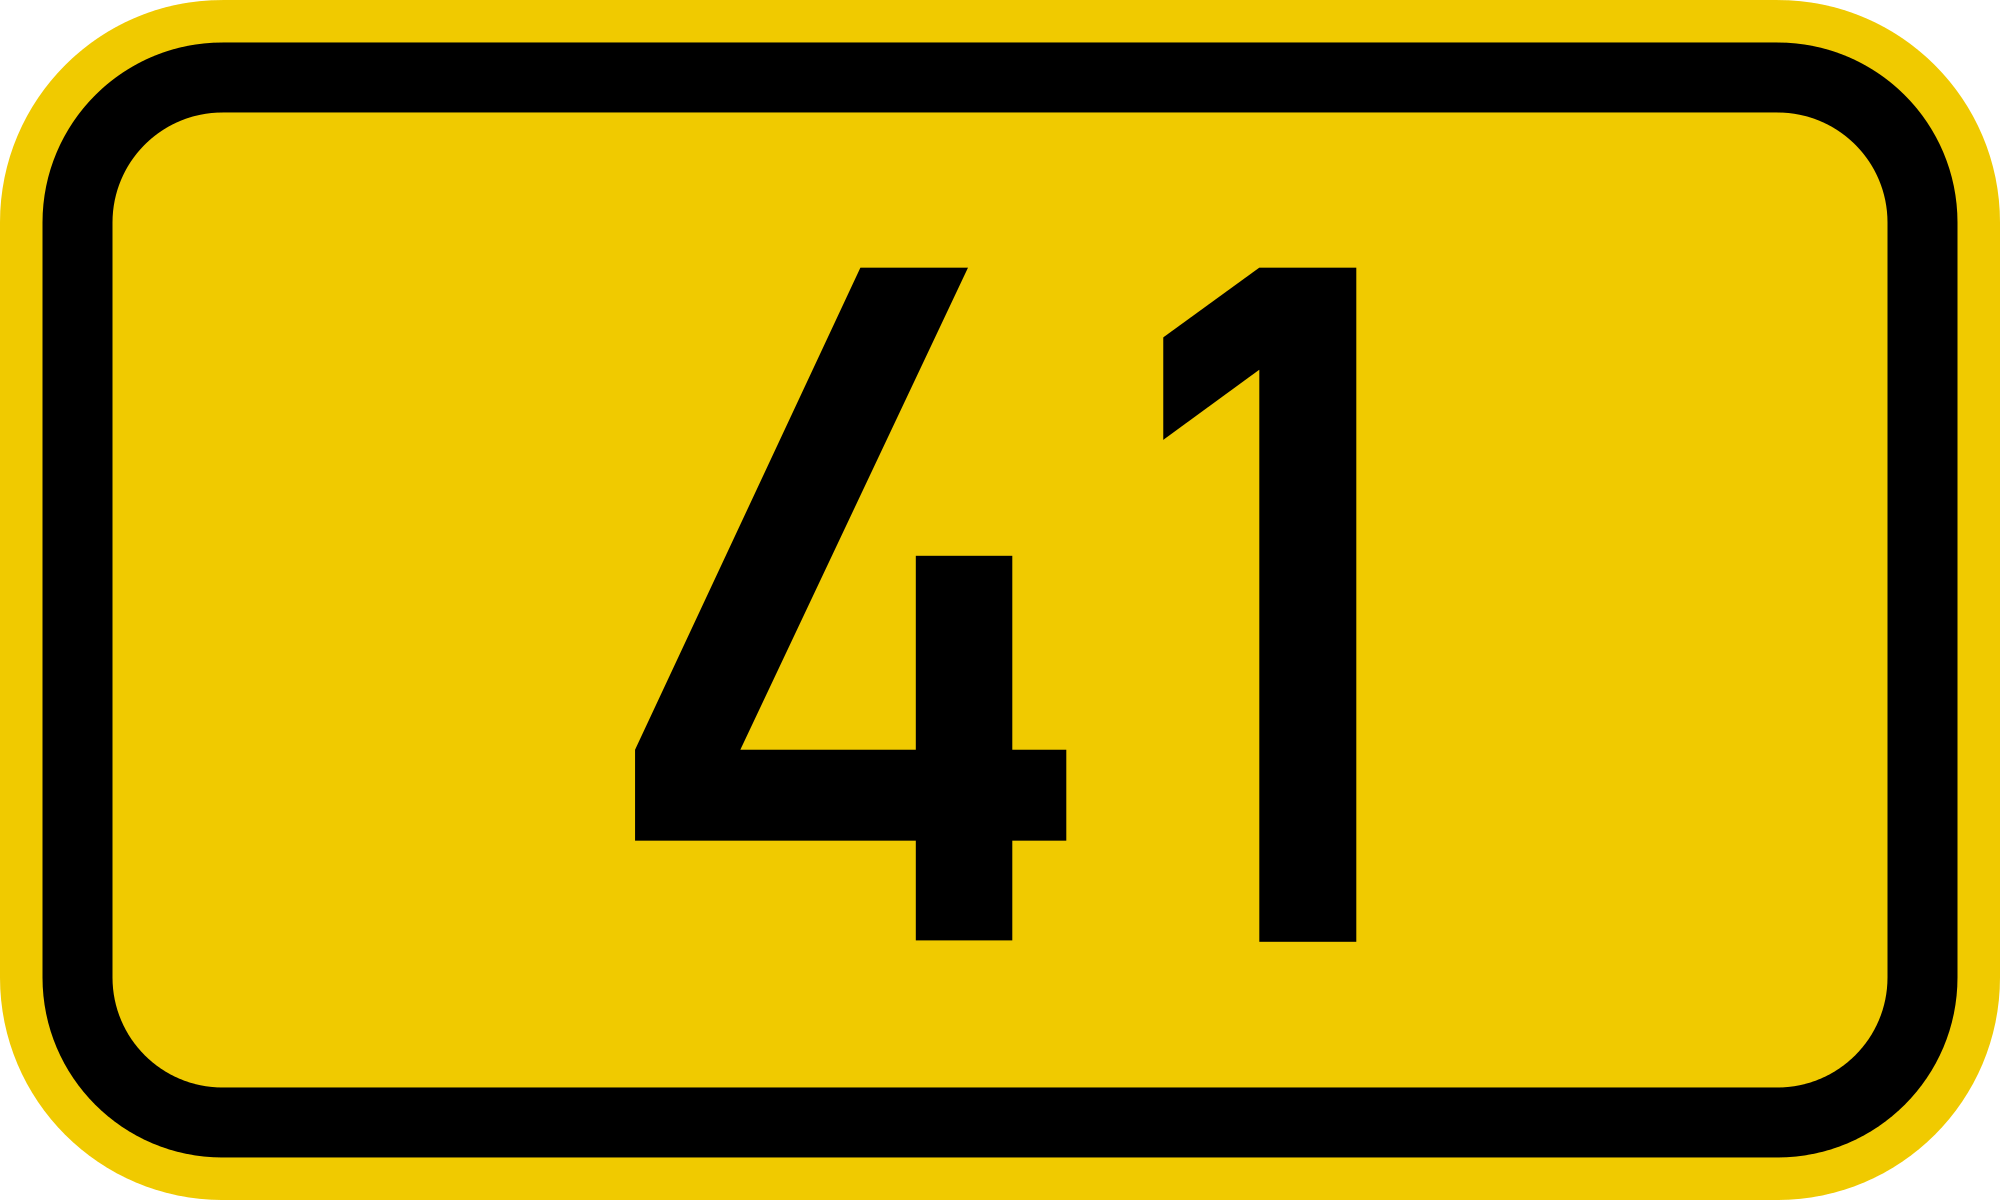 The Number: 41